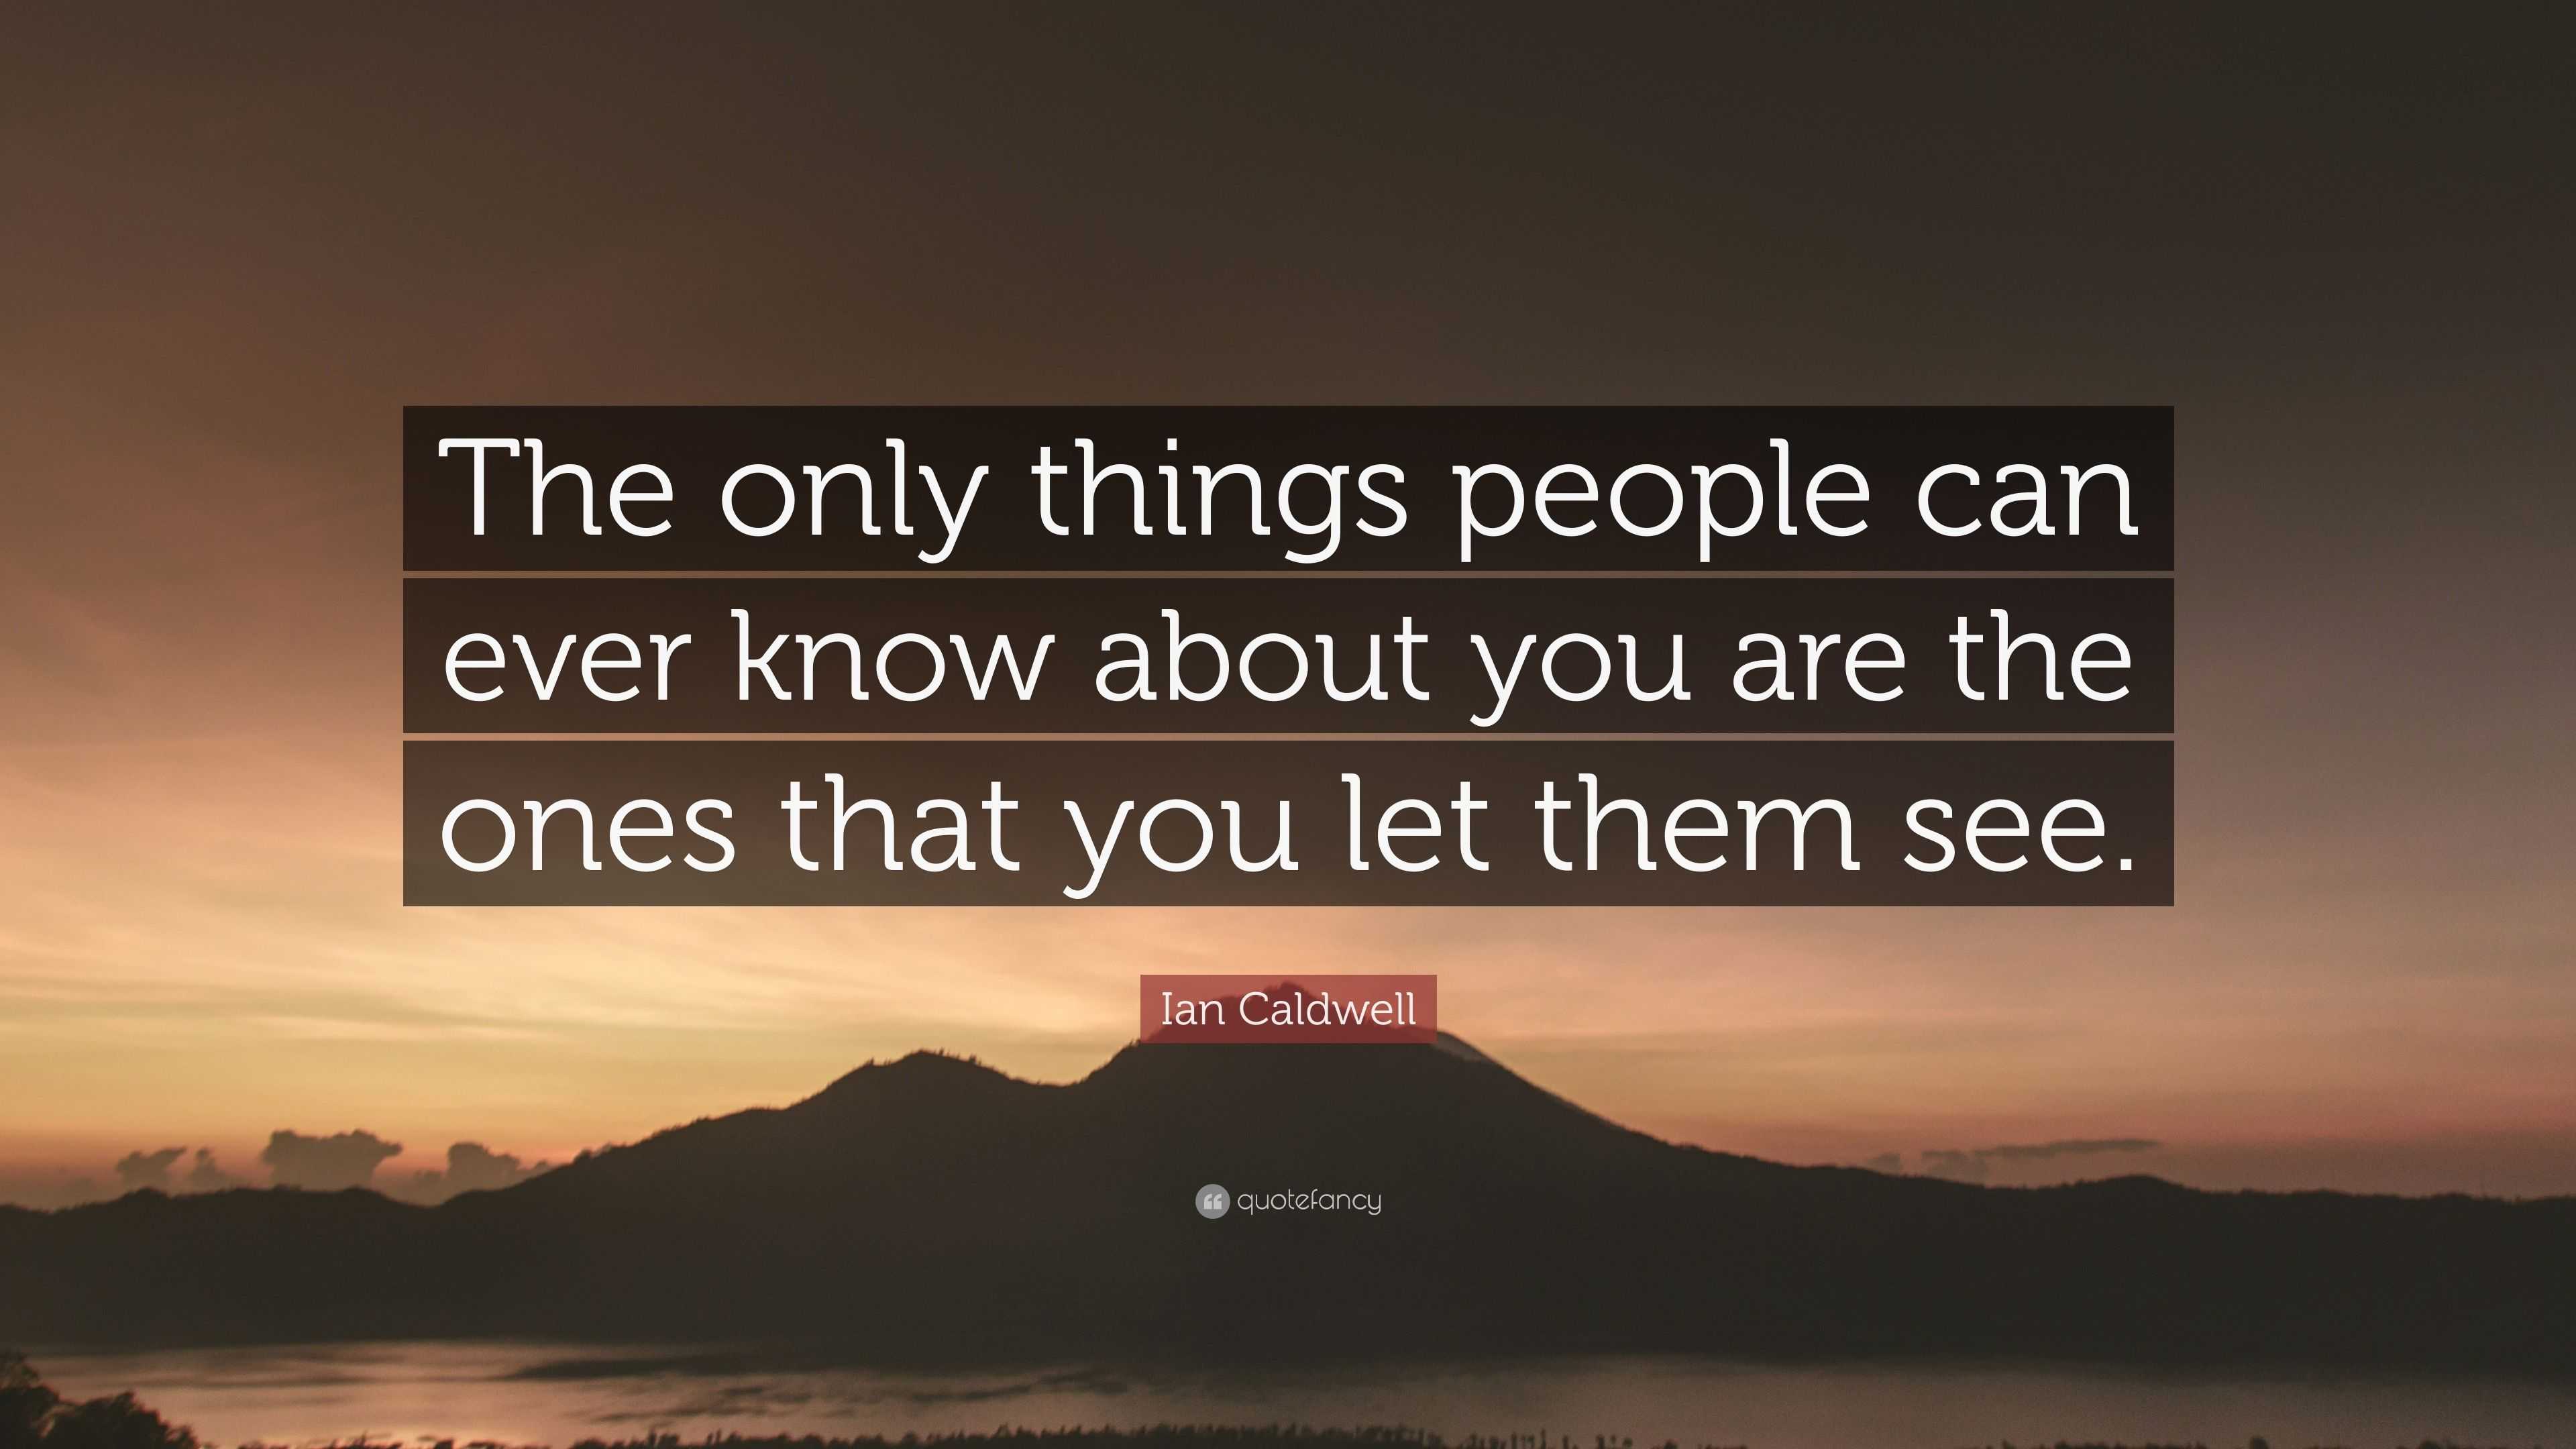 Ian Caldwell Quote: “The only things people can ever know about you are ...